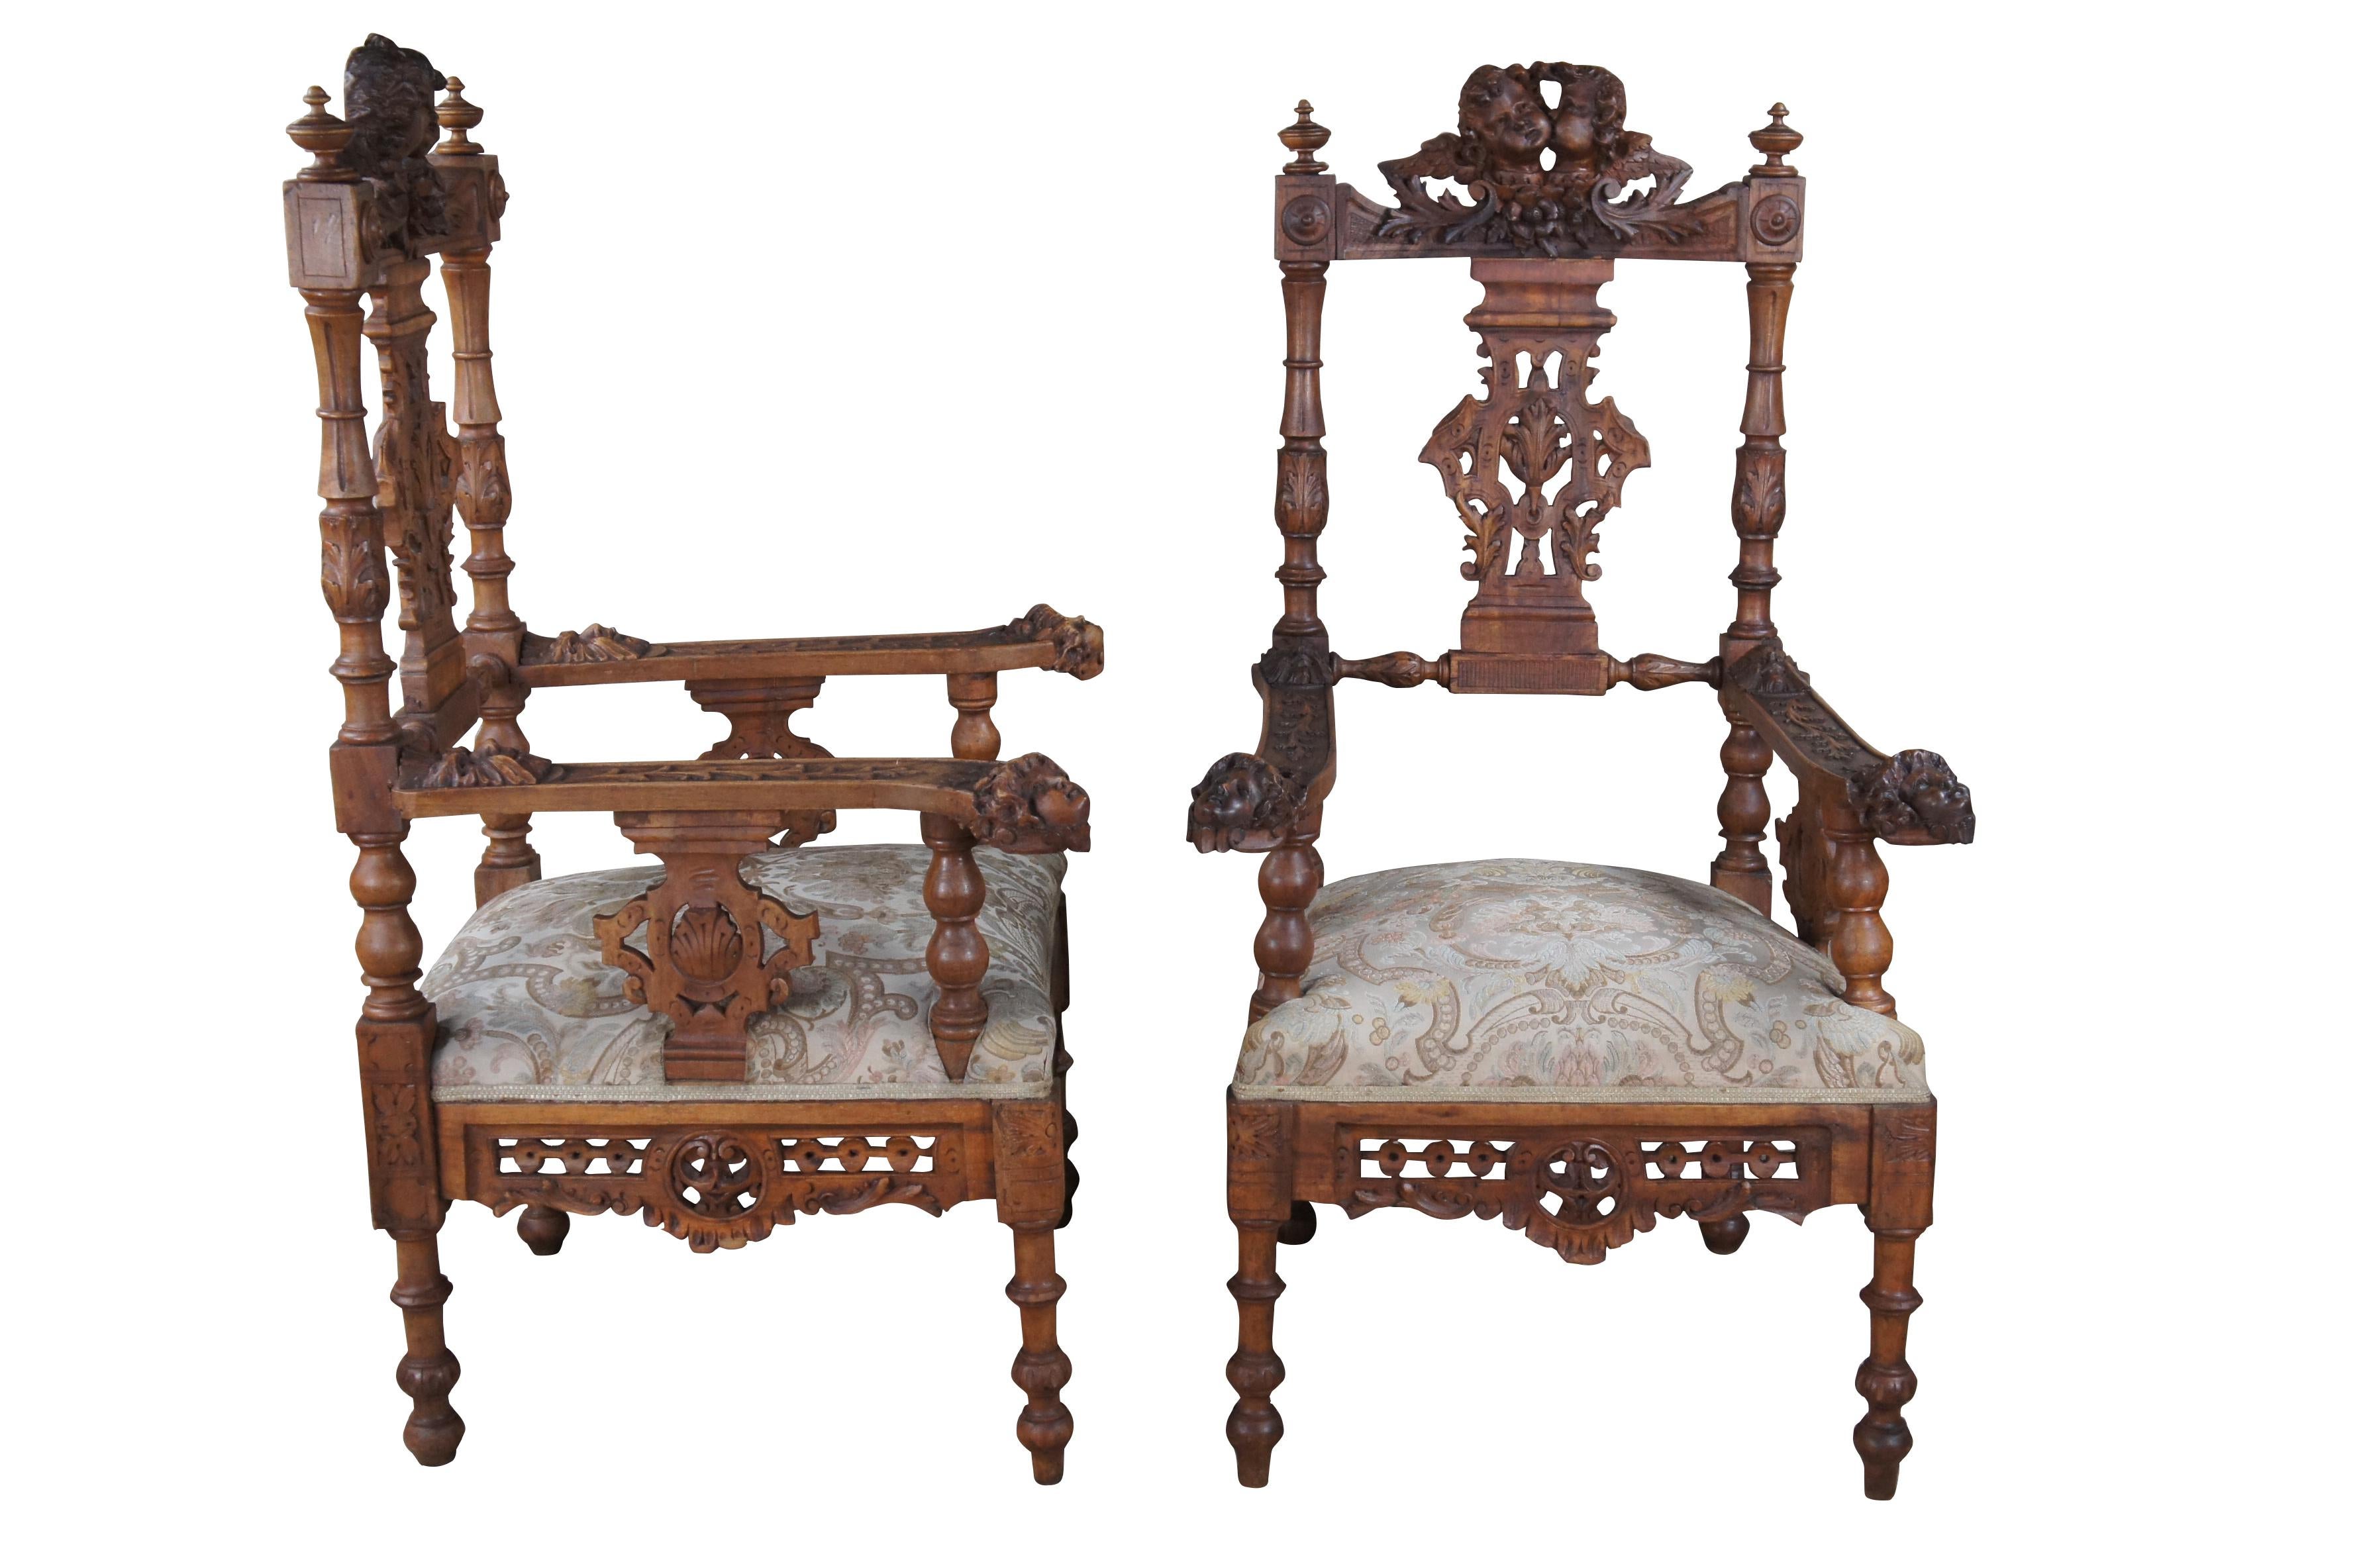 Two antique Italian Renaissance parlor armchairs, circa 1870s.  Made of walnut featuring ornate carved and reticulated design with figural puttis / angels / cherubs adorned throughout.

DIMENSIONS

24.5